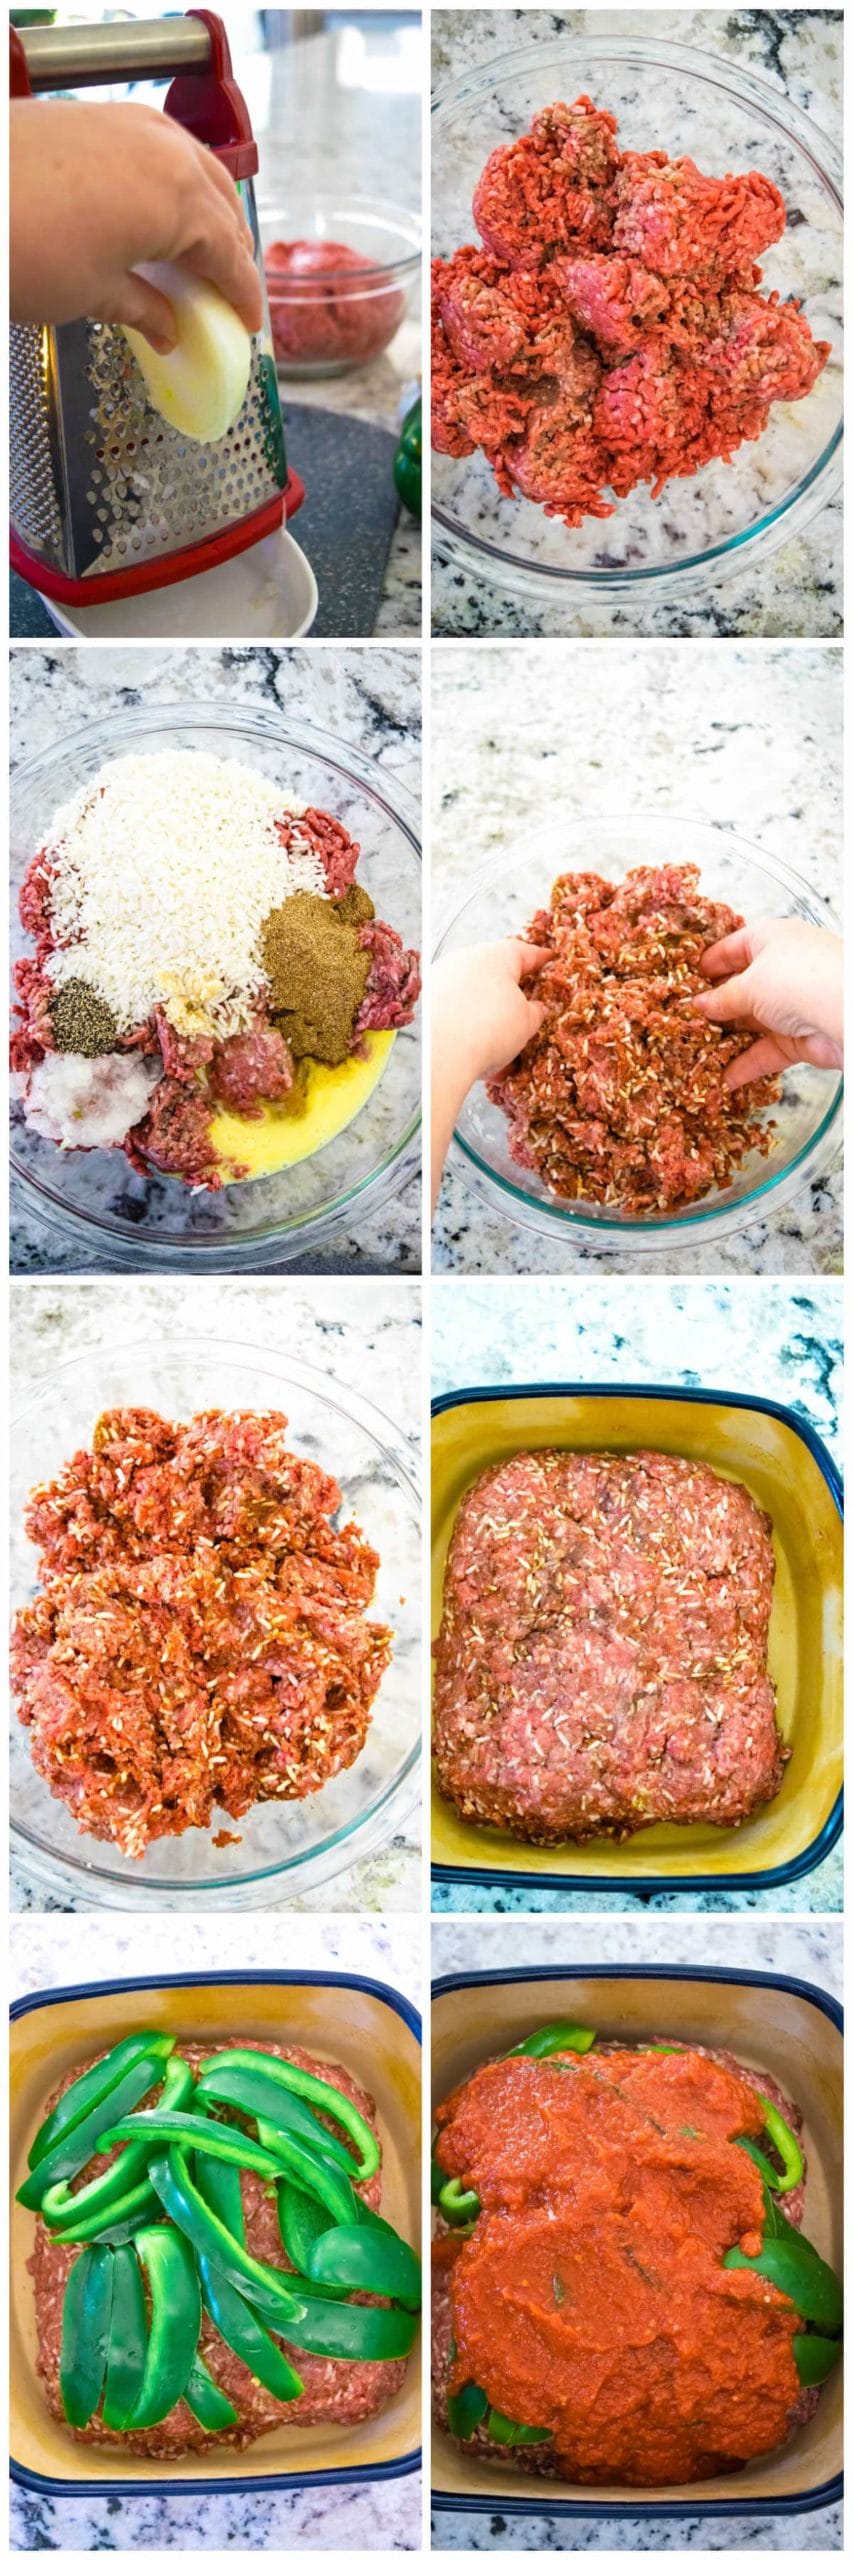 Step-by-step images of making meatloaf.